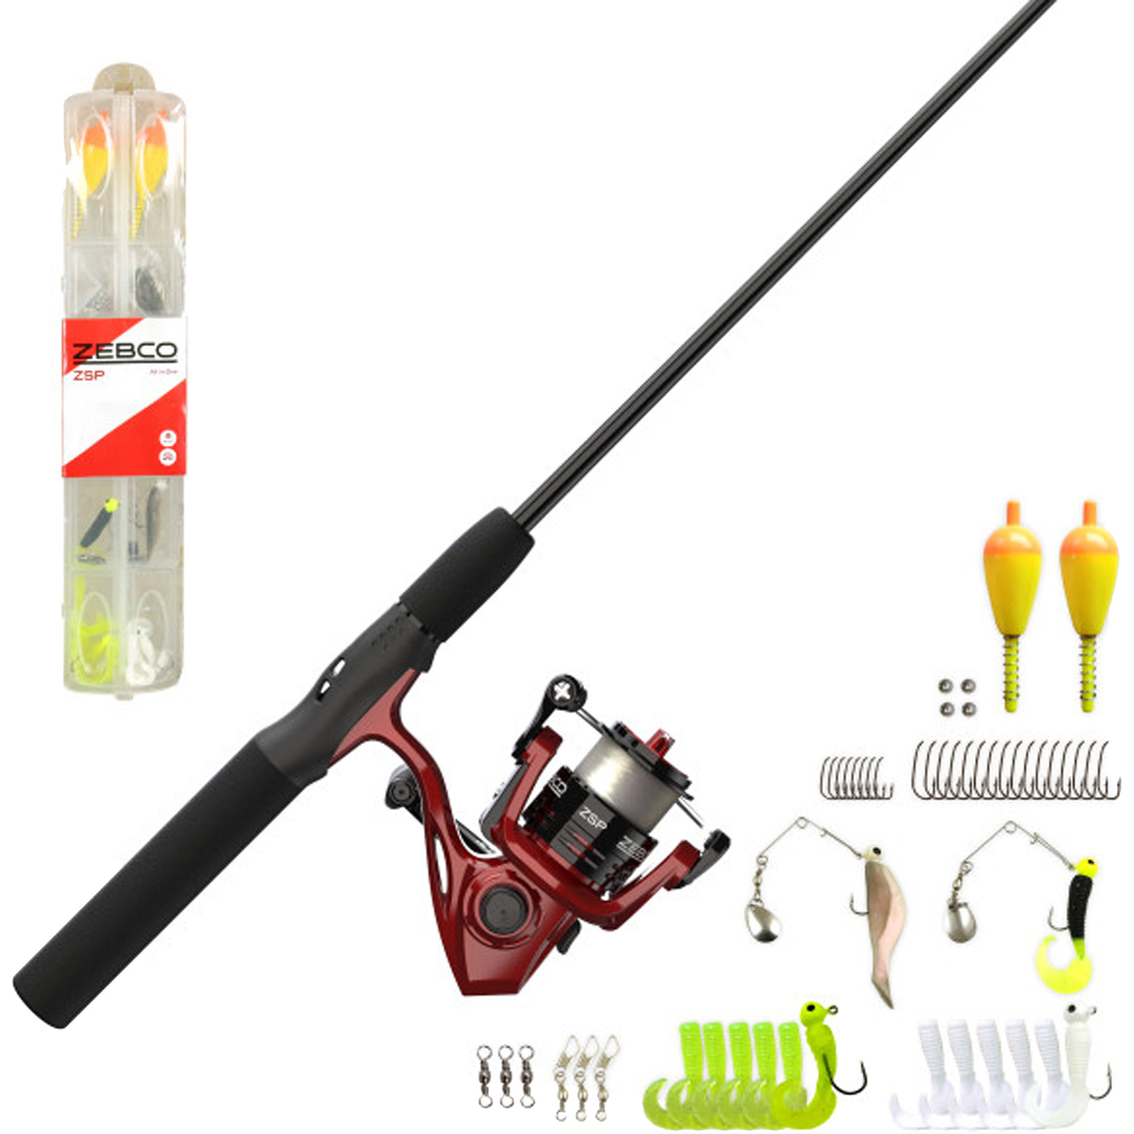 Zebco Zsp 20602ml Spinning Reel Combo Tackle 8, Freshwater Rods & Reels, Sports & Outdoors